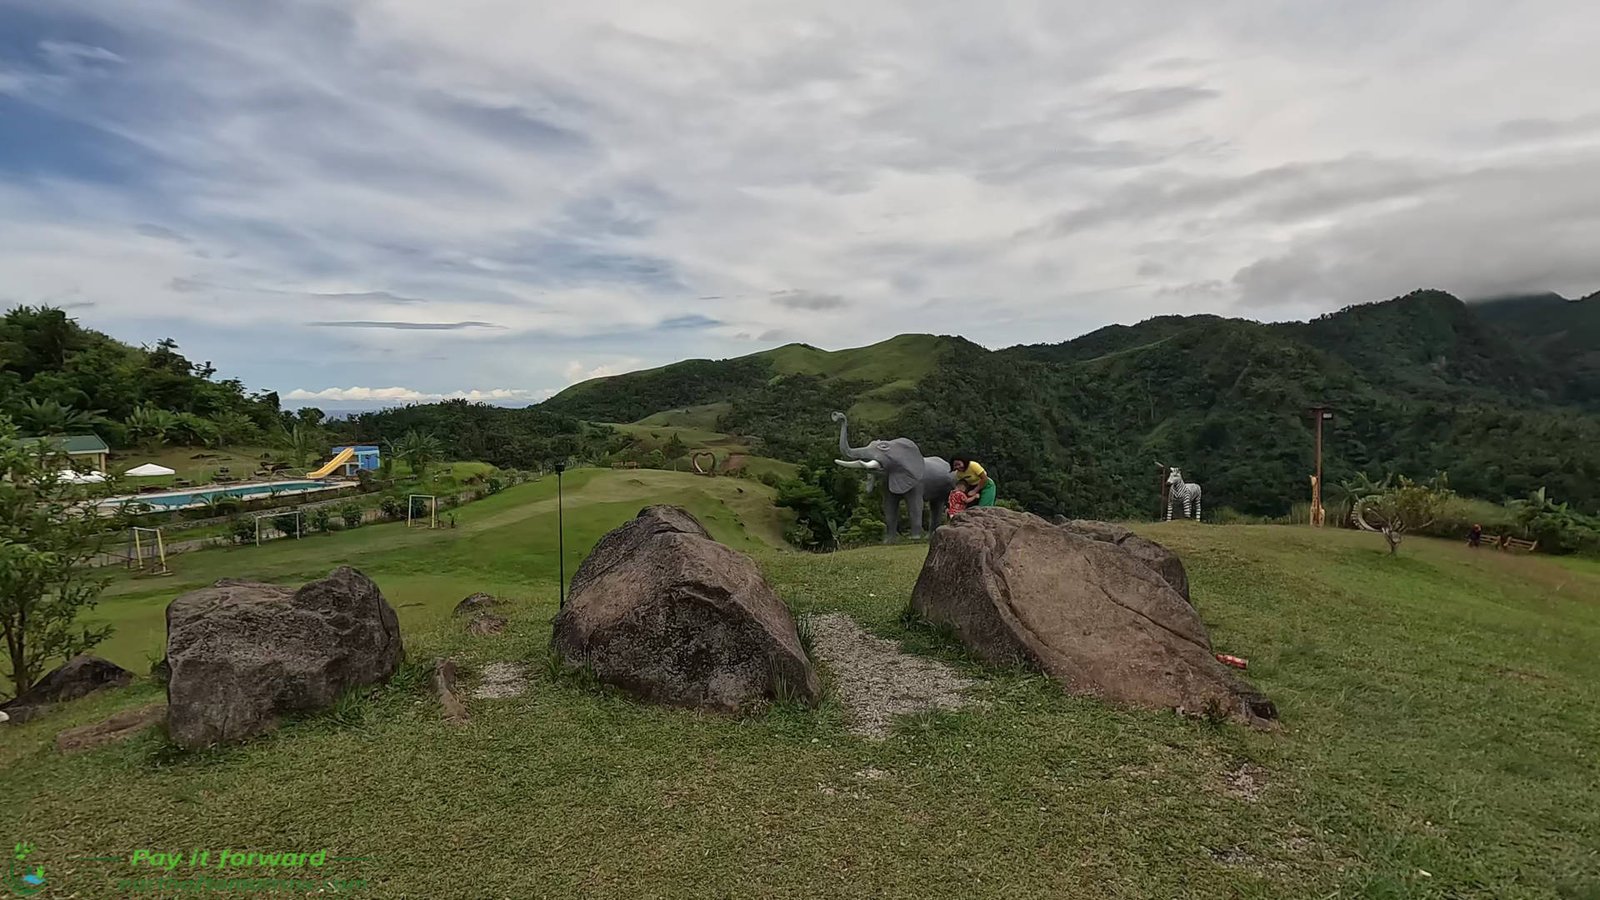 We review Mount Caningag Park in Leyte